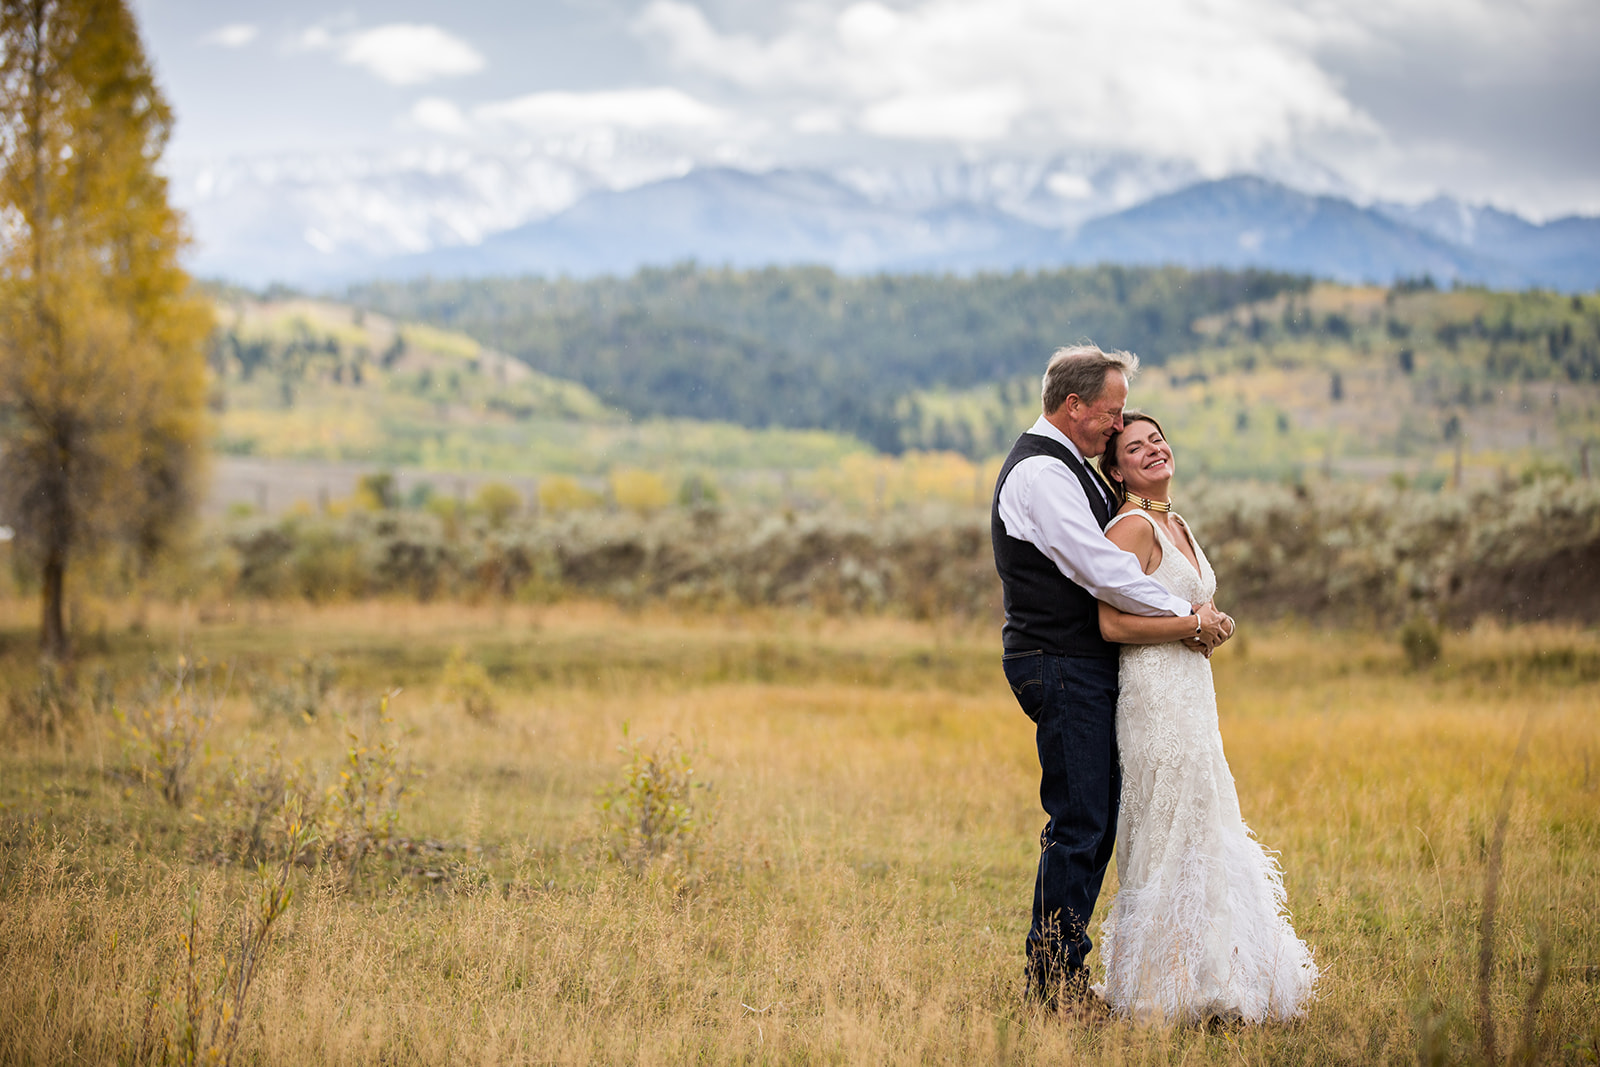 When is the Best Time to Take Engagement Photos in Wyoming or Northern Colorado? | Janelle Rose Photography